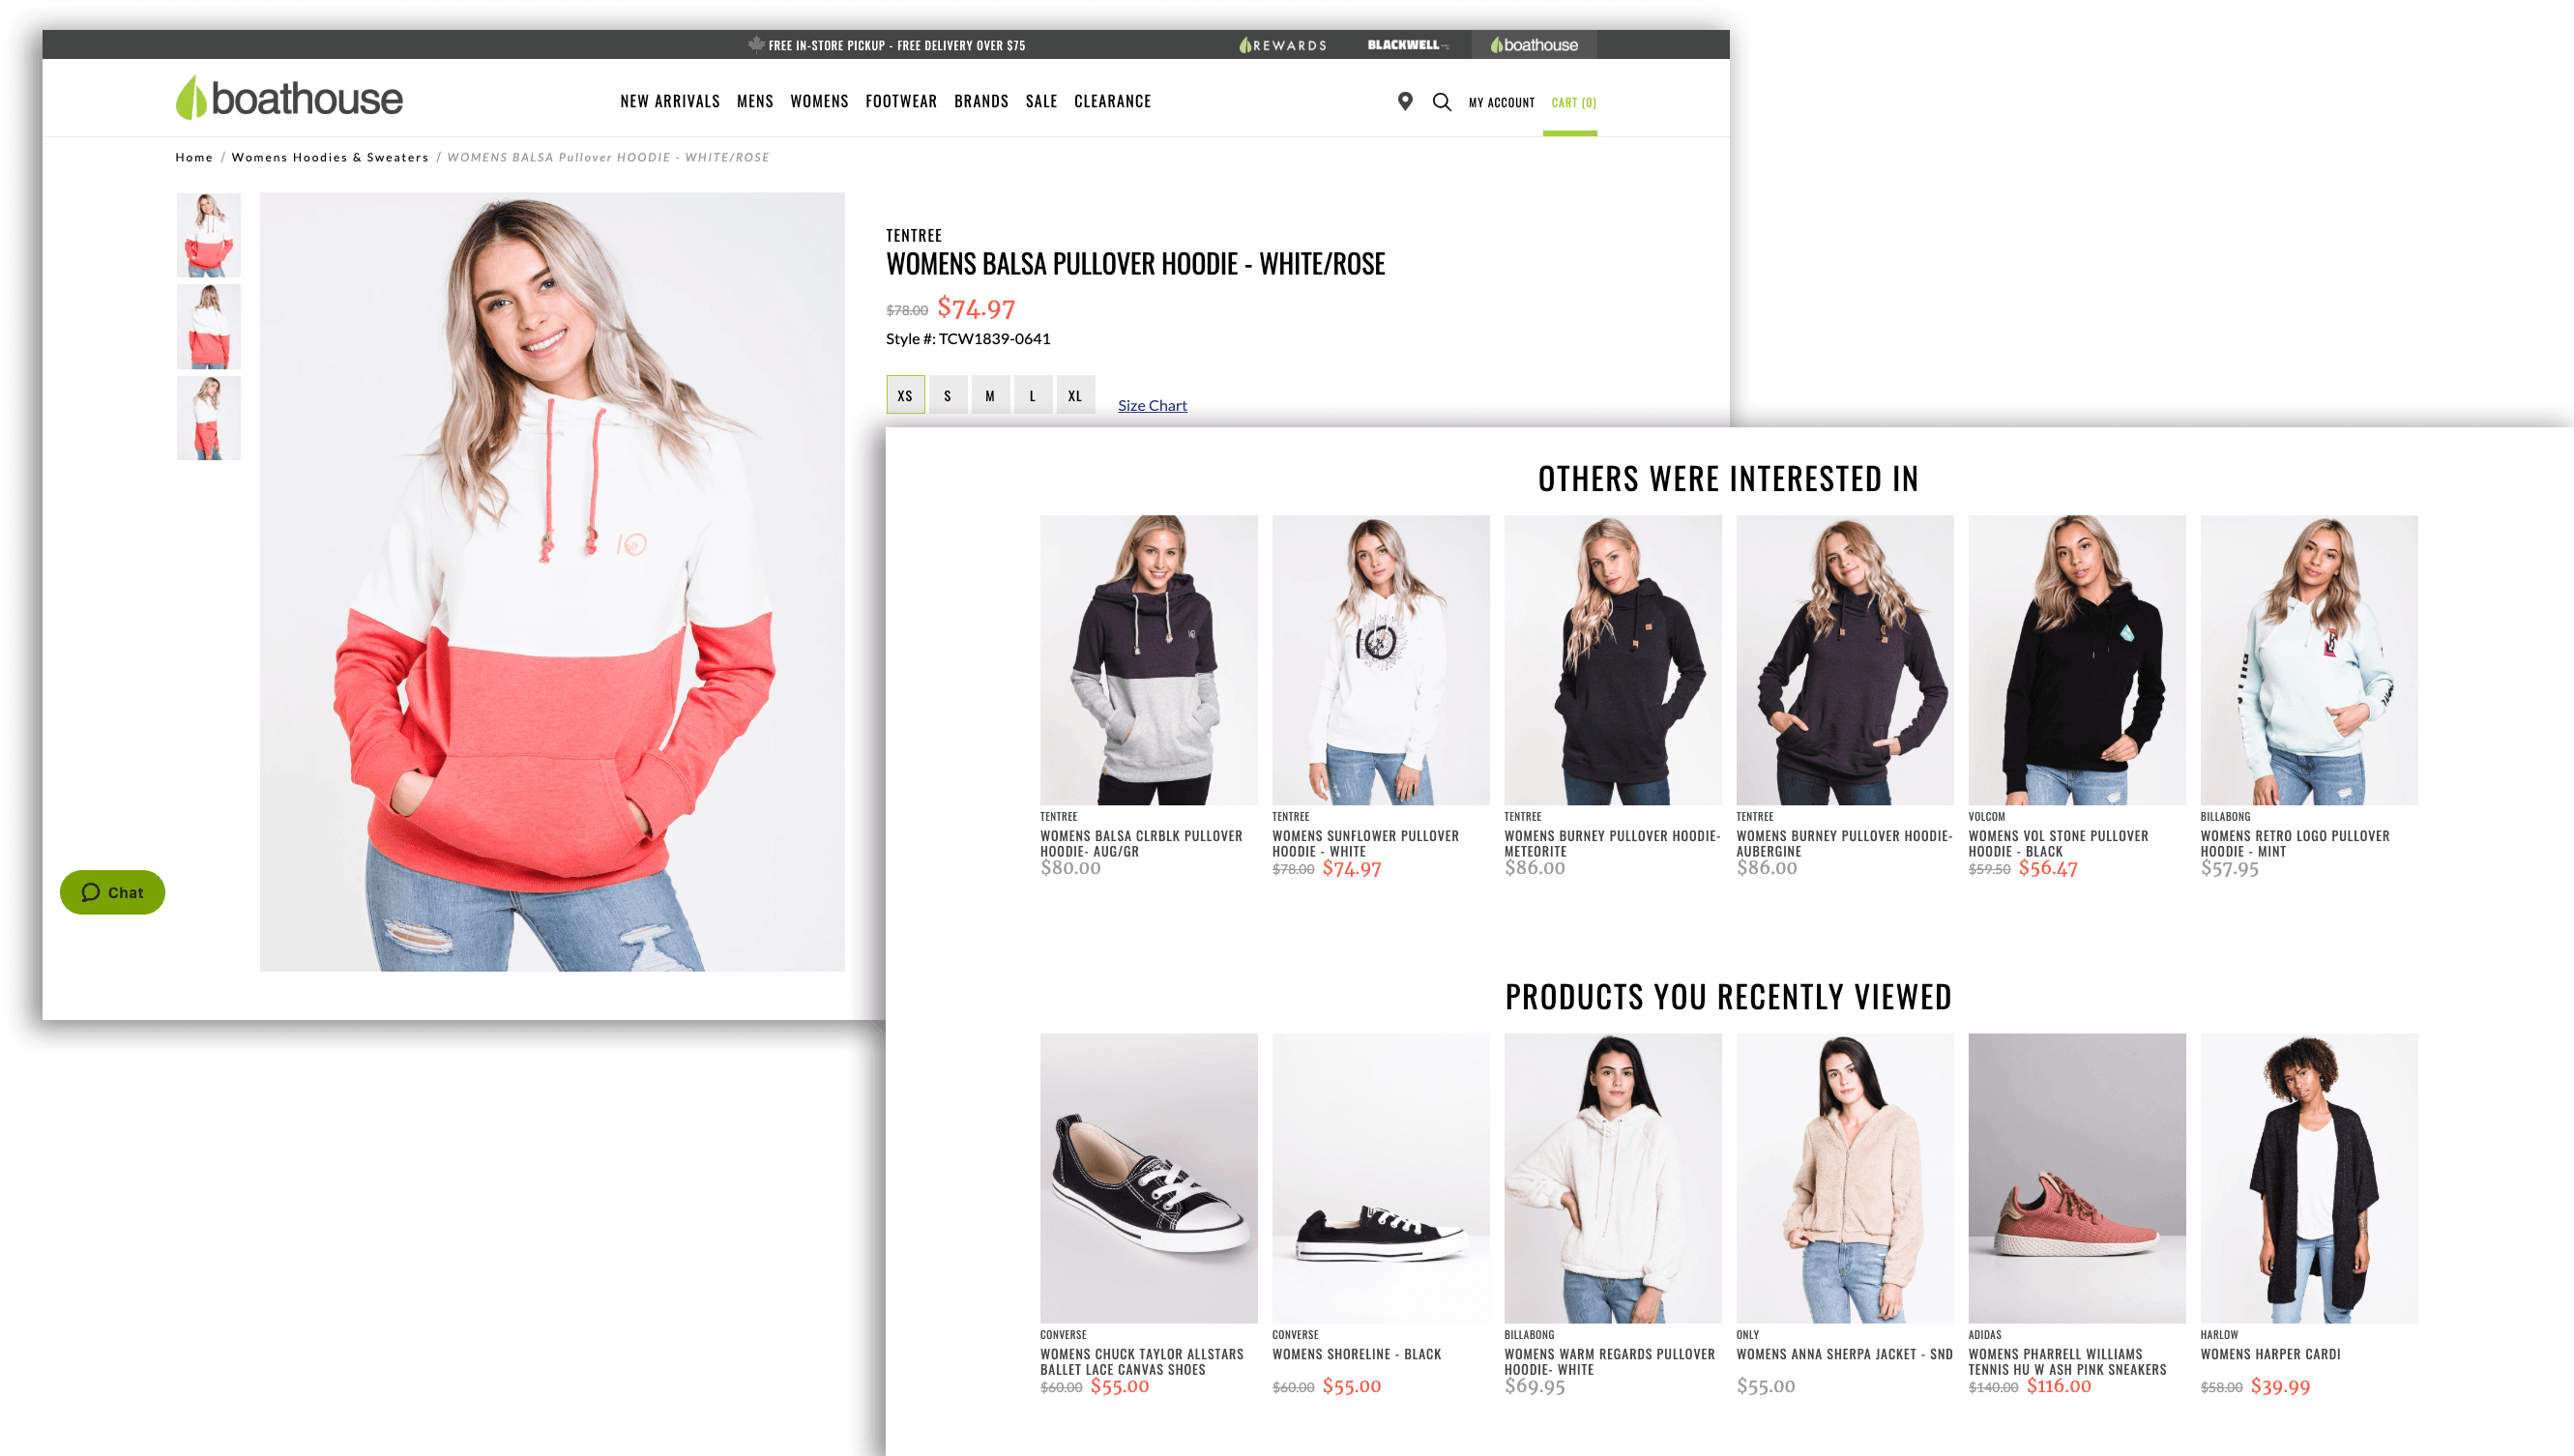 Ecommerce Personalization Tactics–Screenshots from the Boathouse website. The first shows the product page for a hoodie. The second shows the lower half of the page which displays "Others were interested in" and "Products you recently viewed" sections. 